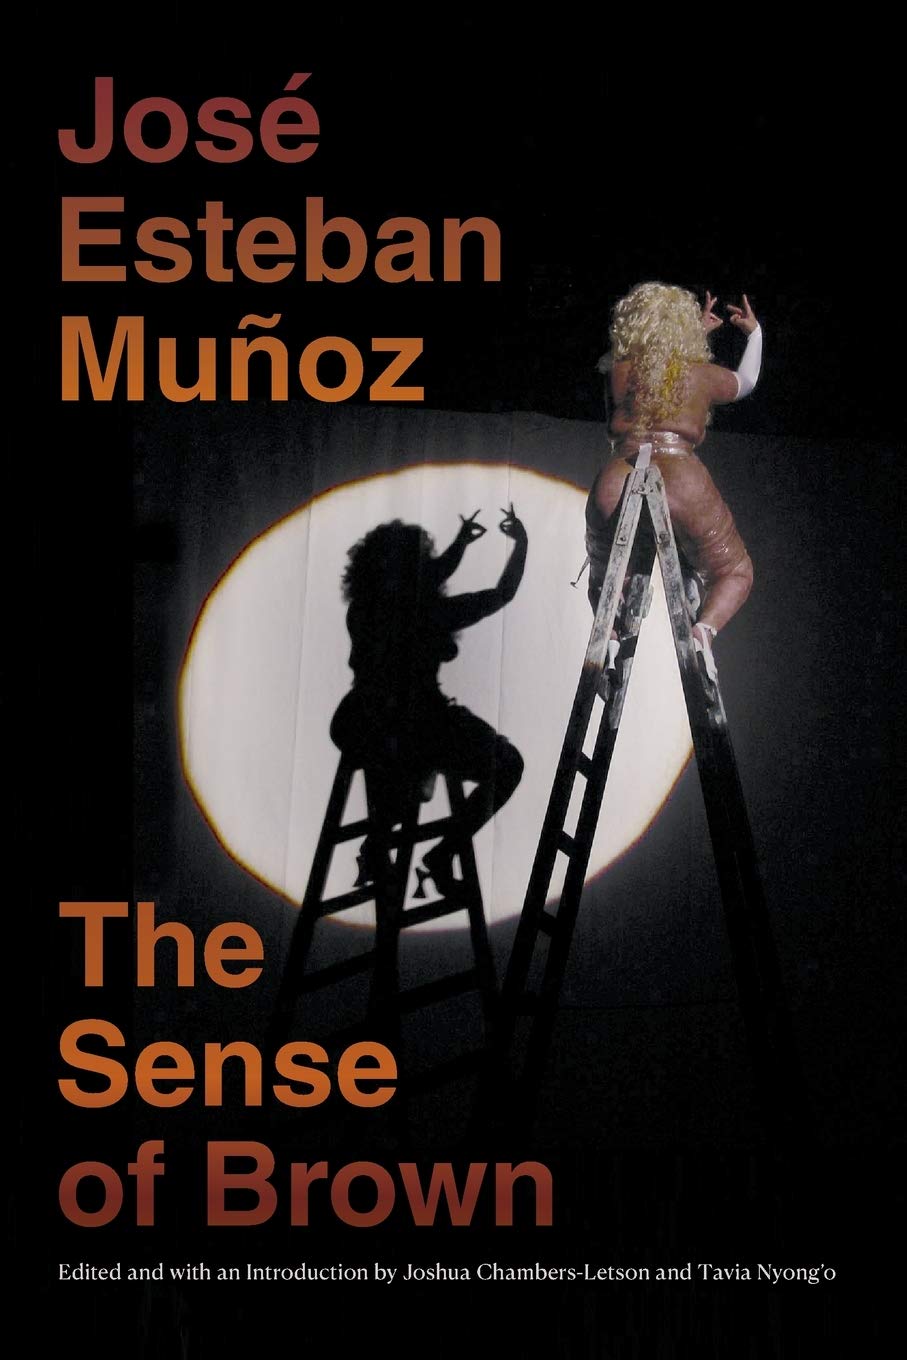 The cover of The Sense of Brown